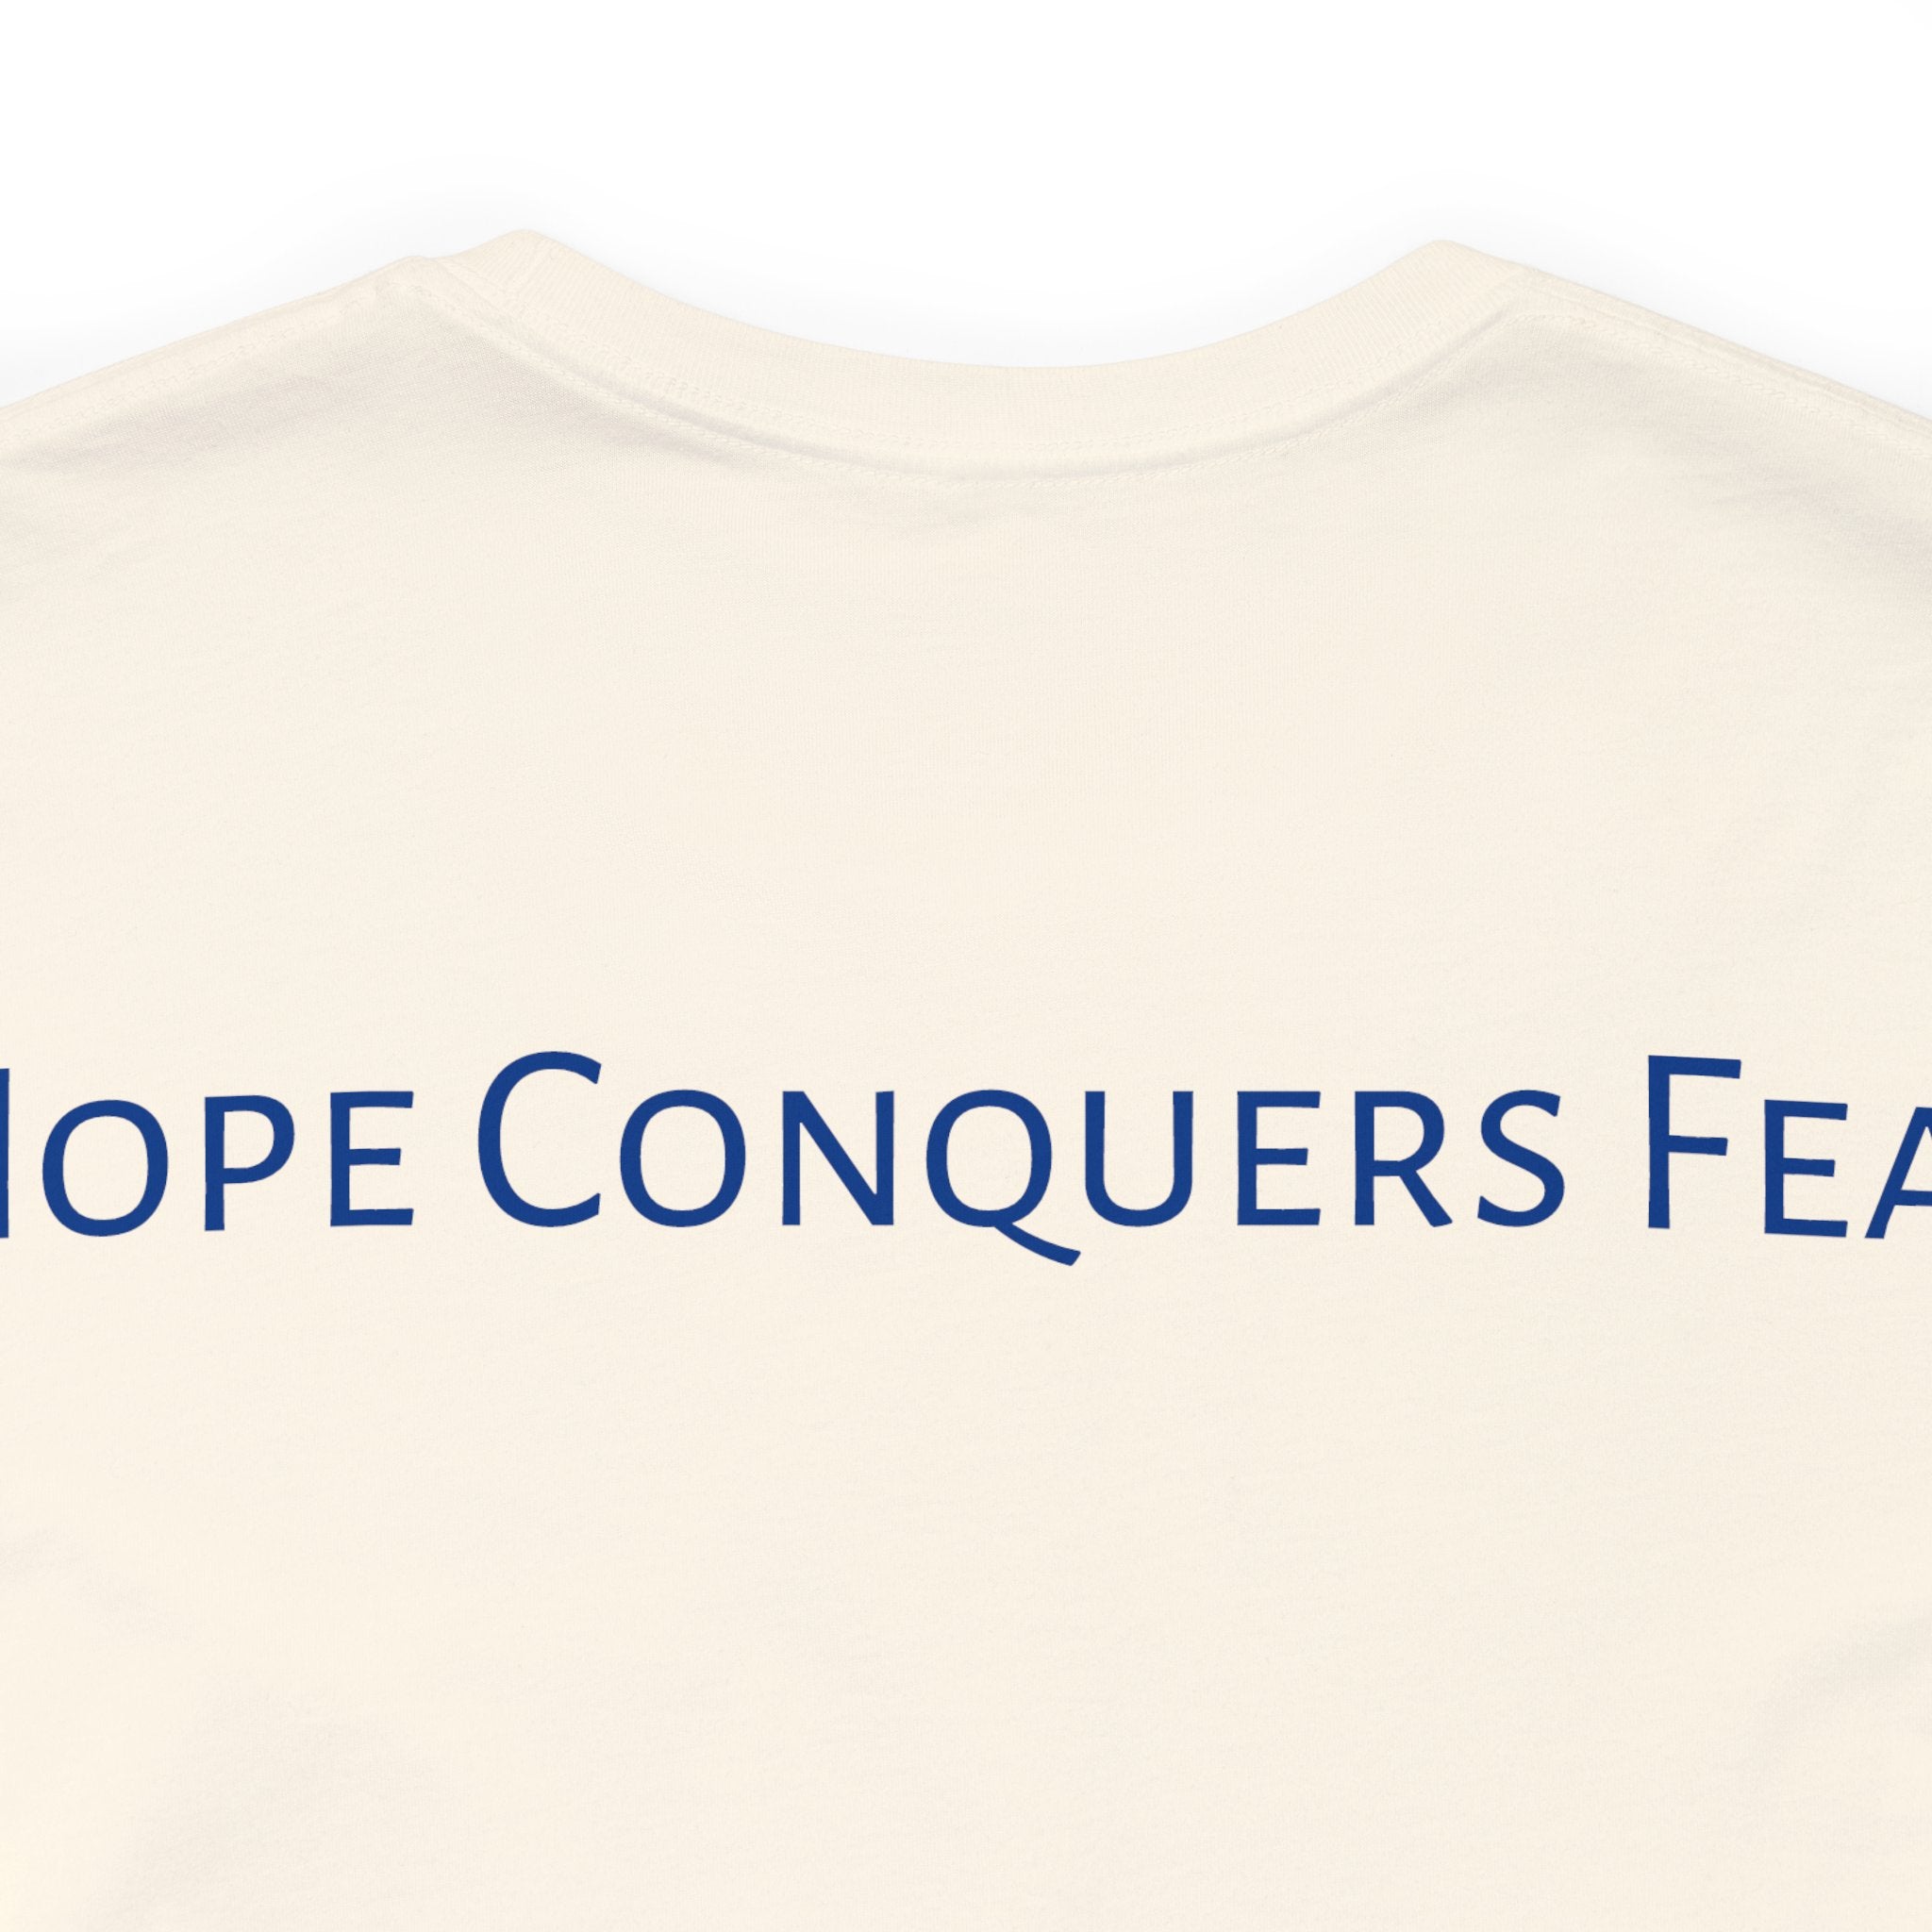 Hope Conquers Fear Jersey Tee - Bella+Canvas 3001 Heather Ice Blue Airlume Cotton Bella+Canvas 3001 Crew Neckline Jersey Short Sleeve Lightweight Fabric Mental Health Support Retail Fit Tear-away Label Tee Unisex Tee T-Shirt 12632003269921936953_2048 Printify